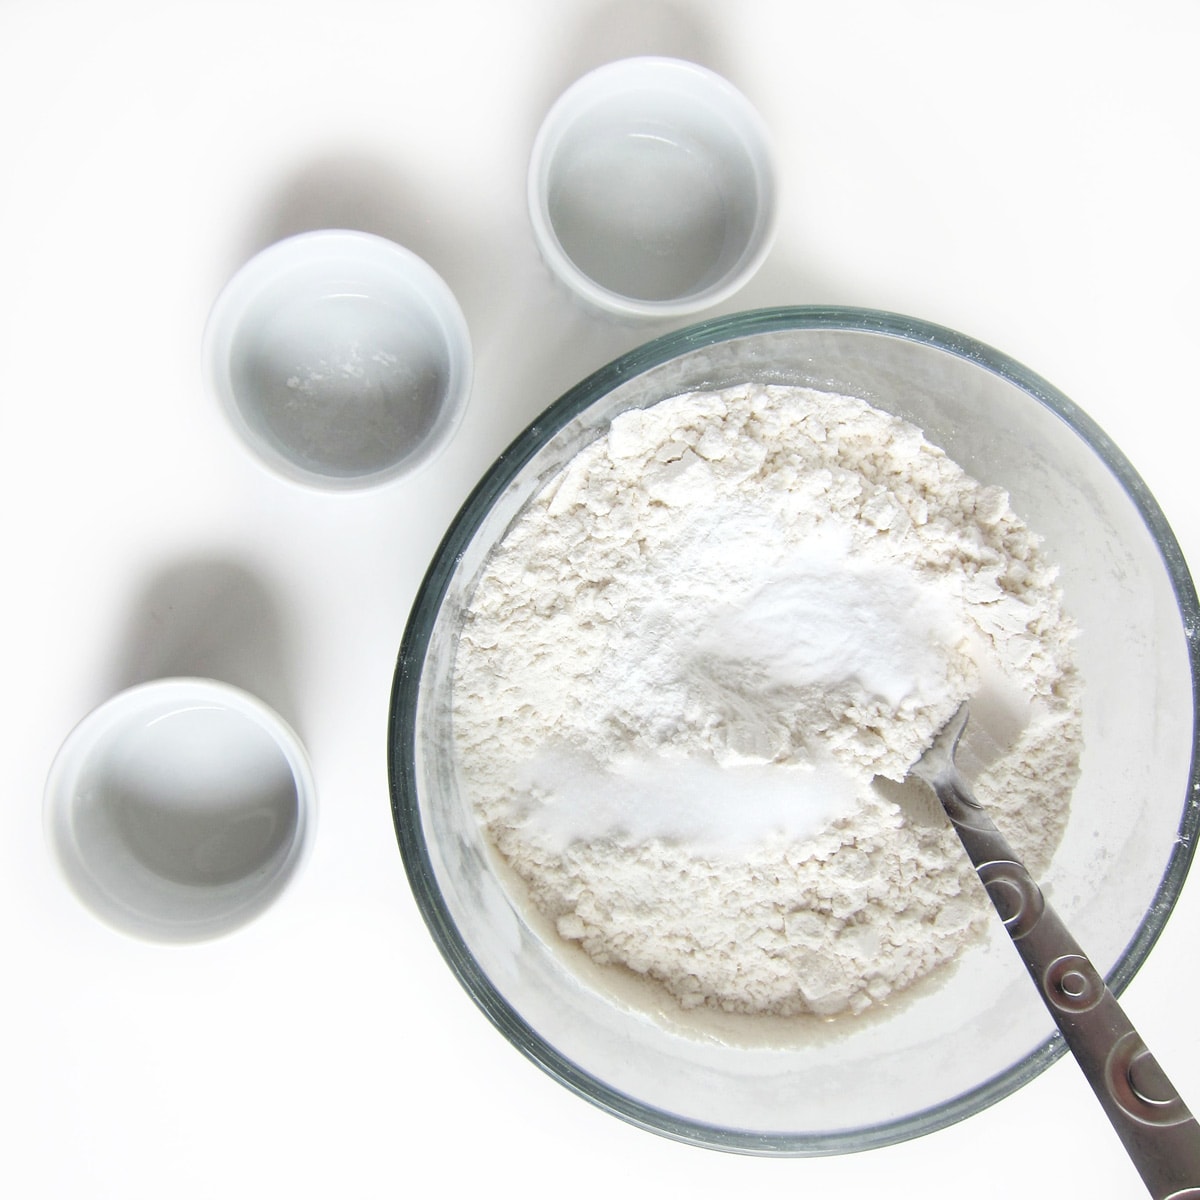 Mix dry ingredients including all-purpose flour, baking soda, baking powder, and salt.